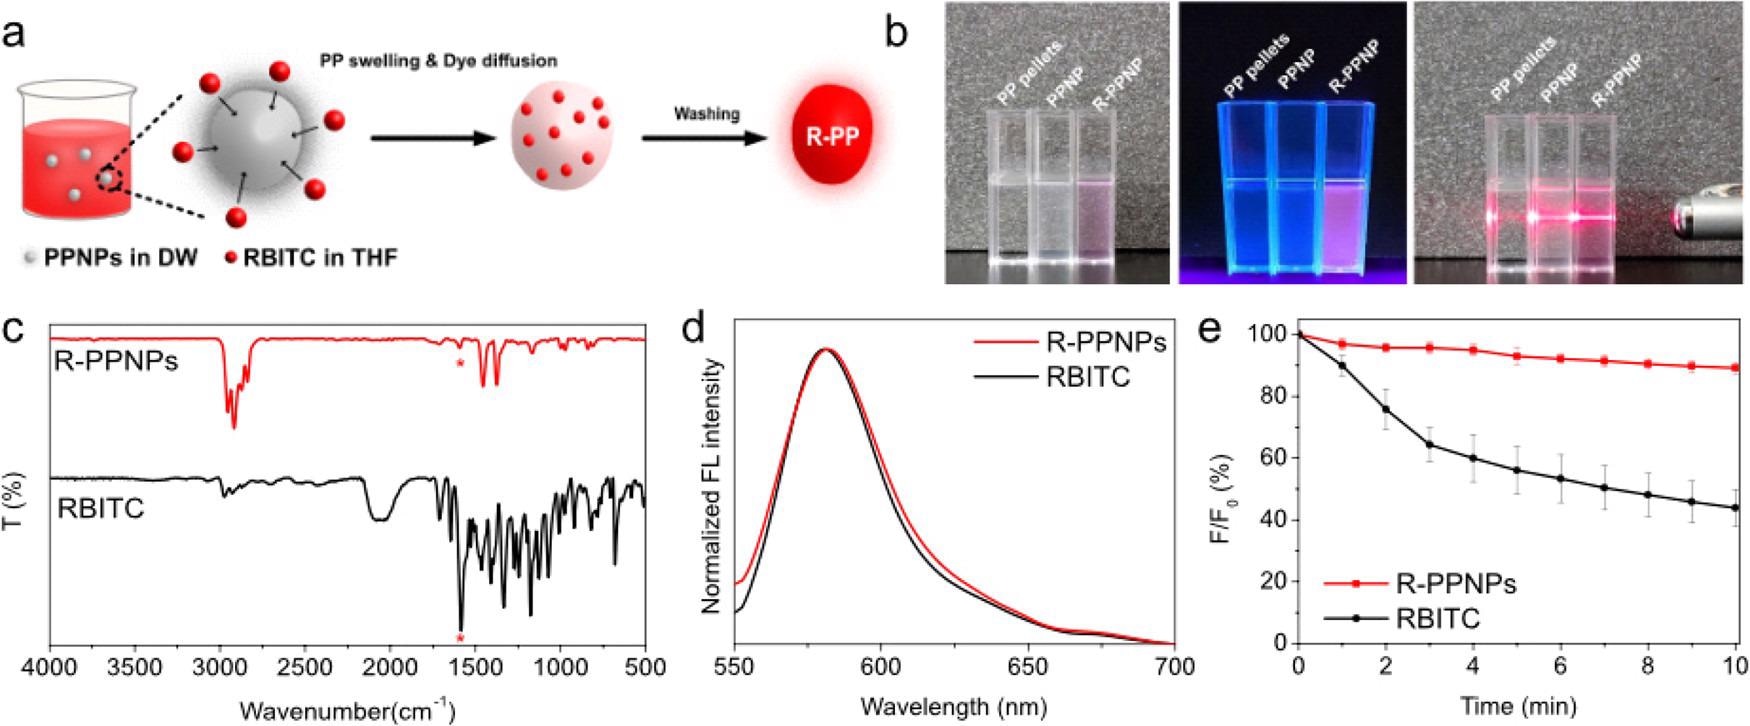 (a) Scheme of fluorescence labeling of PPNPs by the CSD method. (b) Photographs of PP pellets, PPNPs, and R-PPNP suspension in DW under visible light (left), UV light (365 nm, middle), and visible light with laser beam (right). (c) FT-IR spectra, (d) fluorescence spectra, and (e) fluorescence stability of RBITC and R-PPNPs.